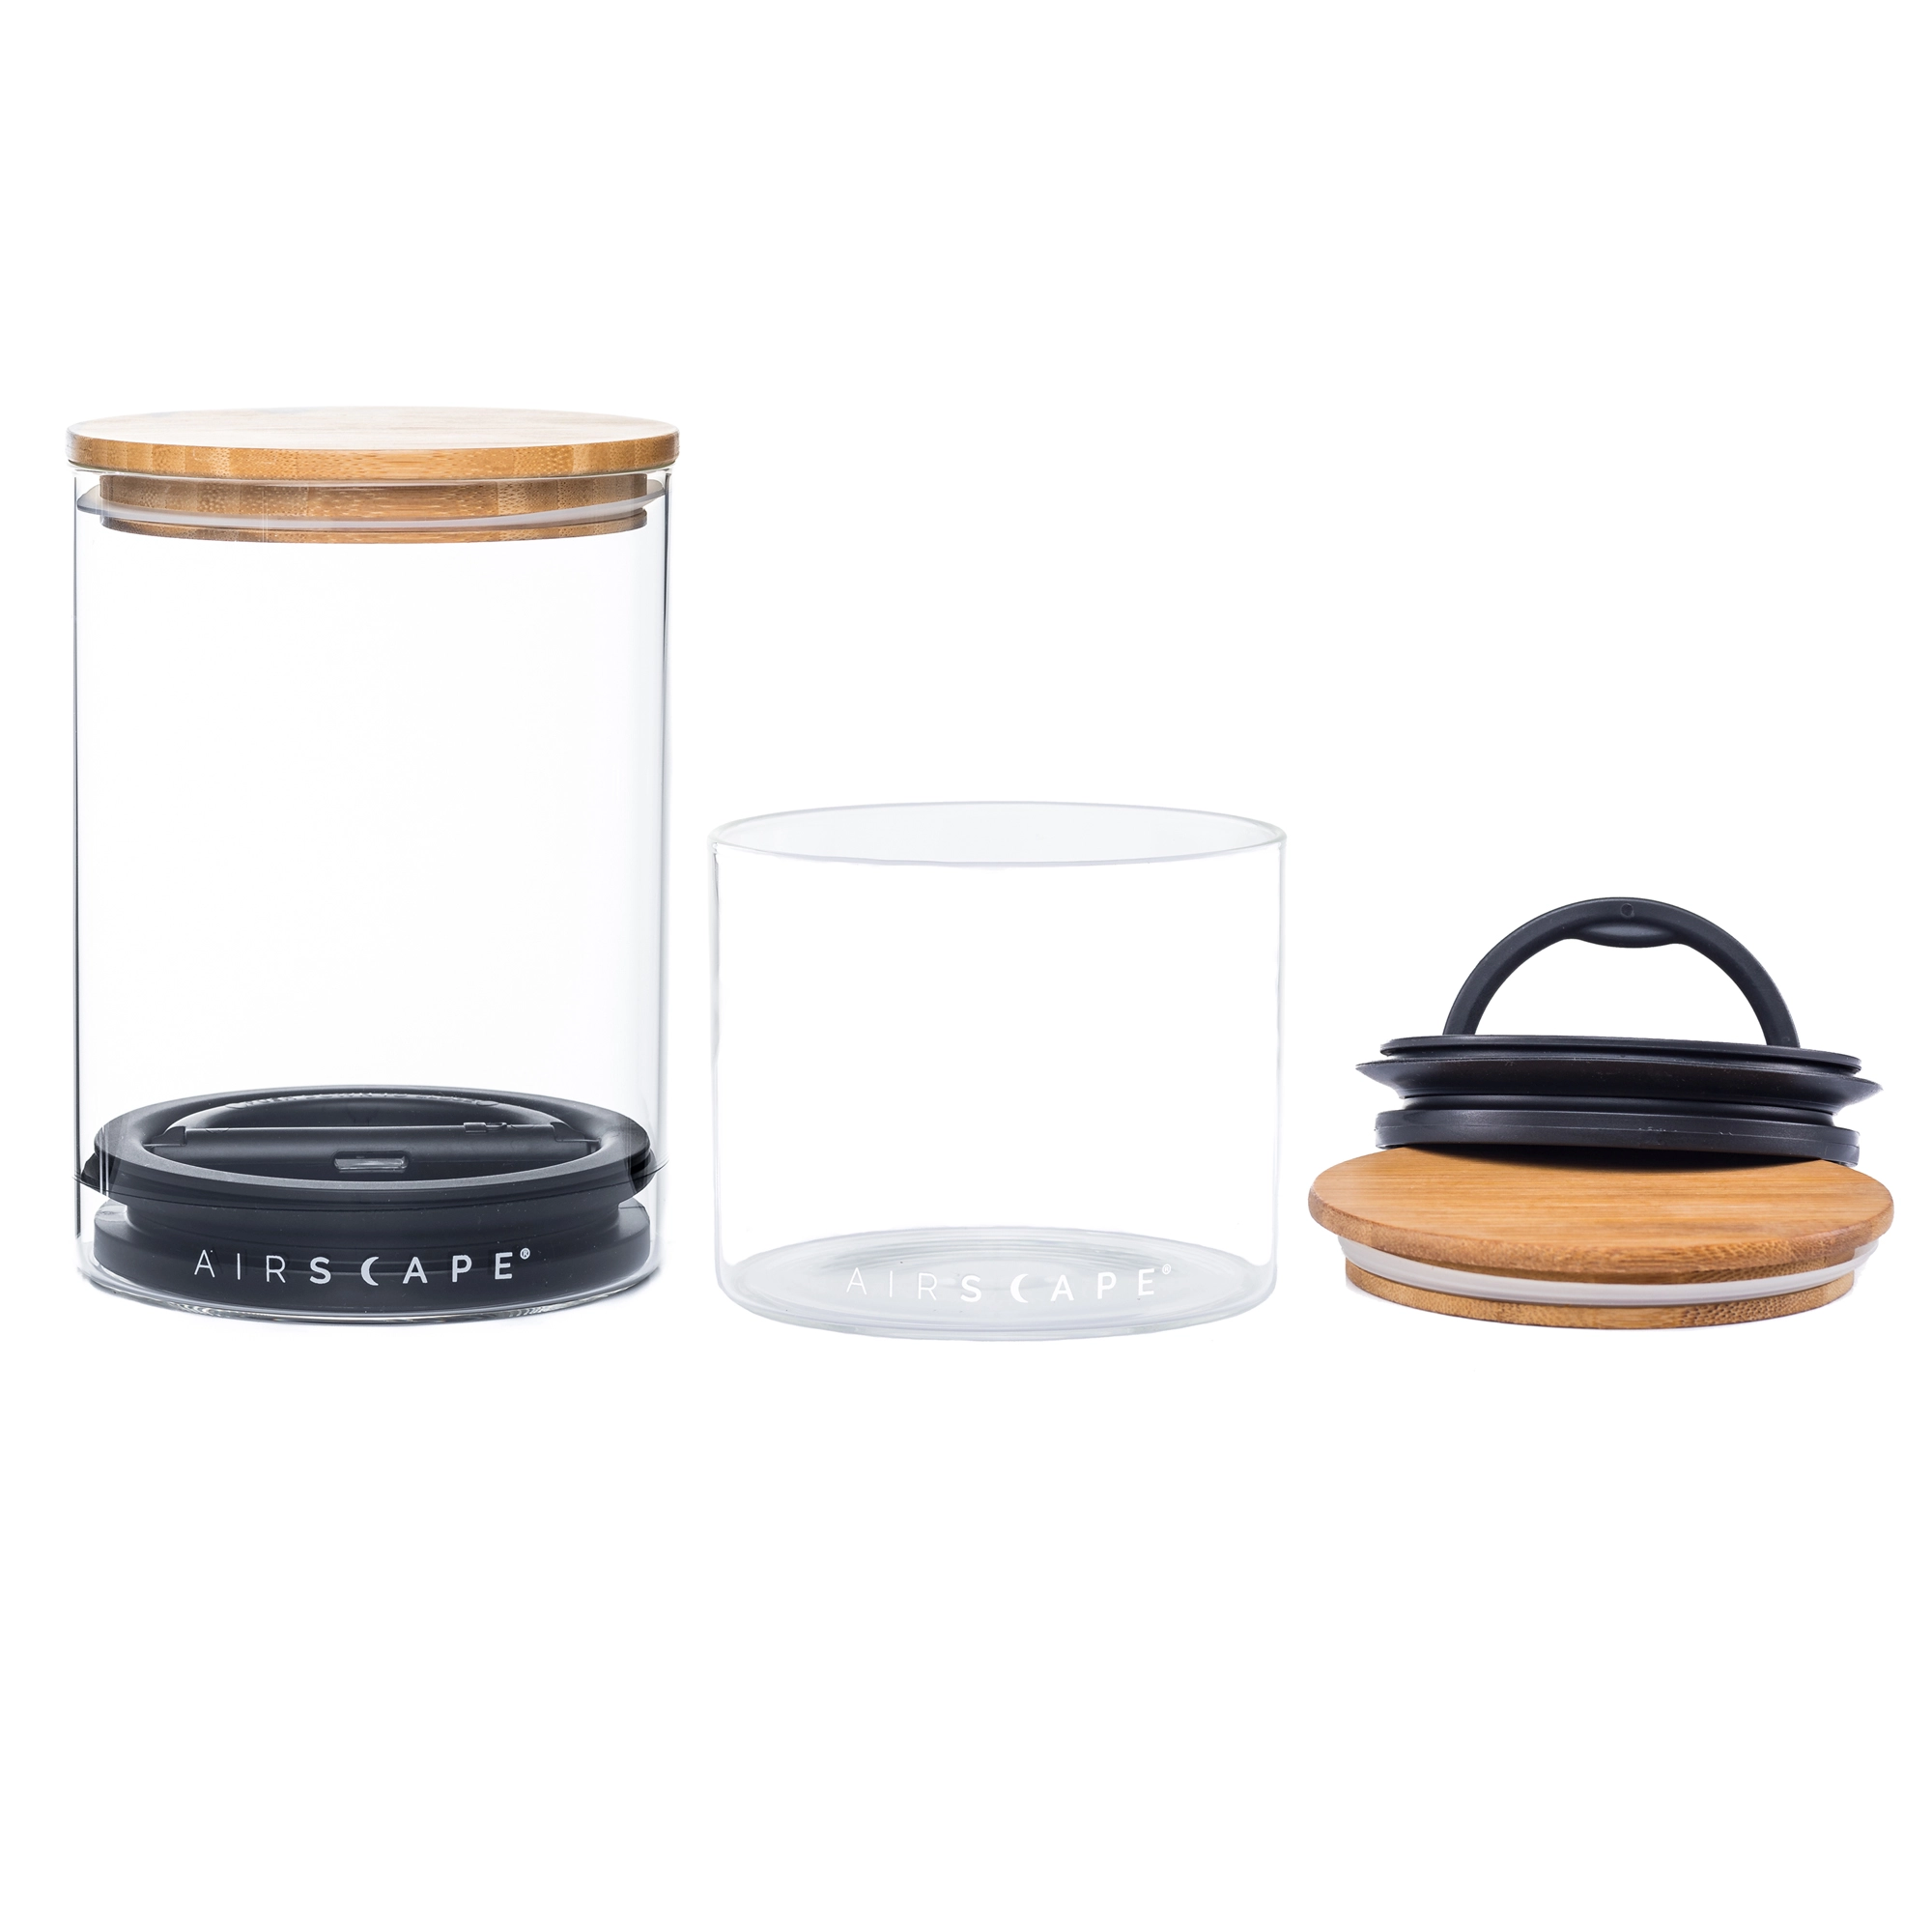 https://planetarydesign.com/wp-content/uploads/2021/05/Airscape-Glass-Kitchen-Canister-Set-with-Bamboo-Lid-copy.webp